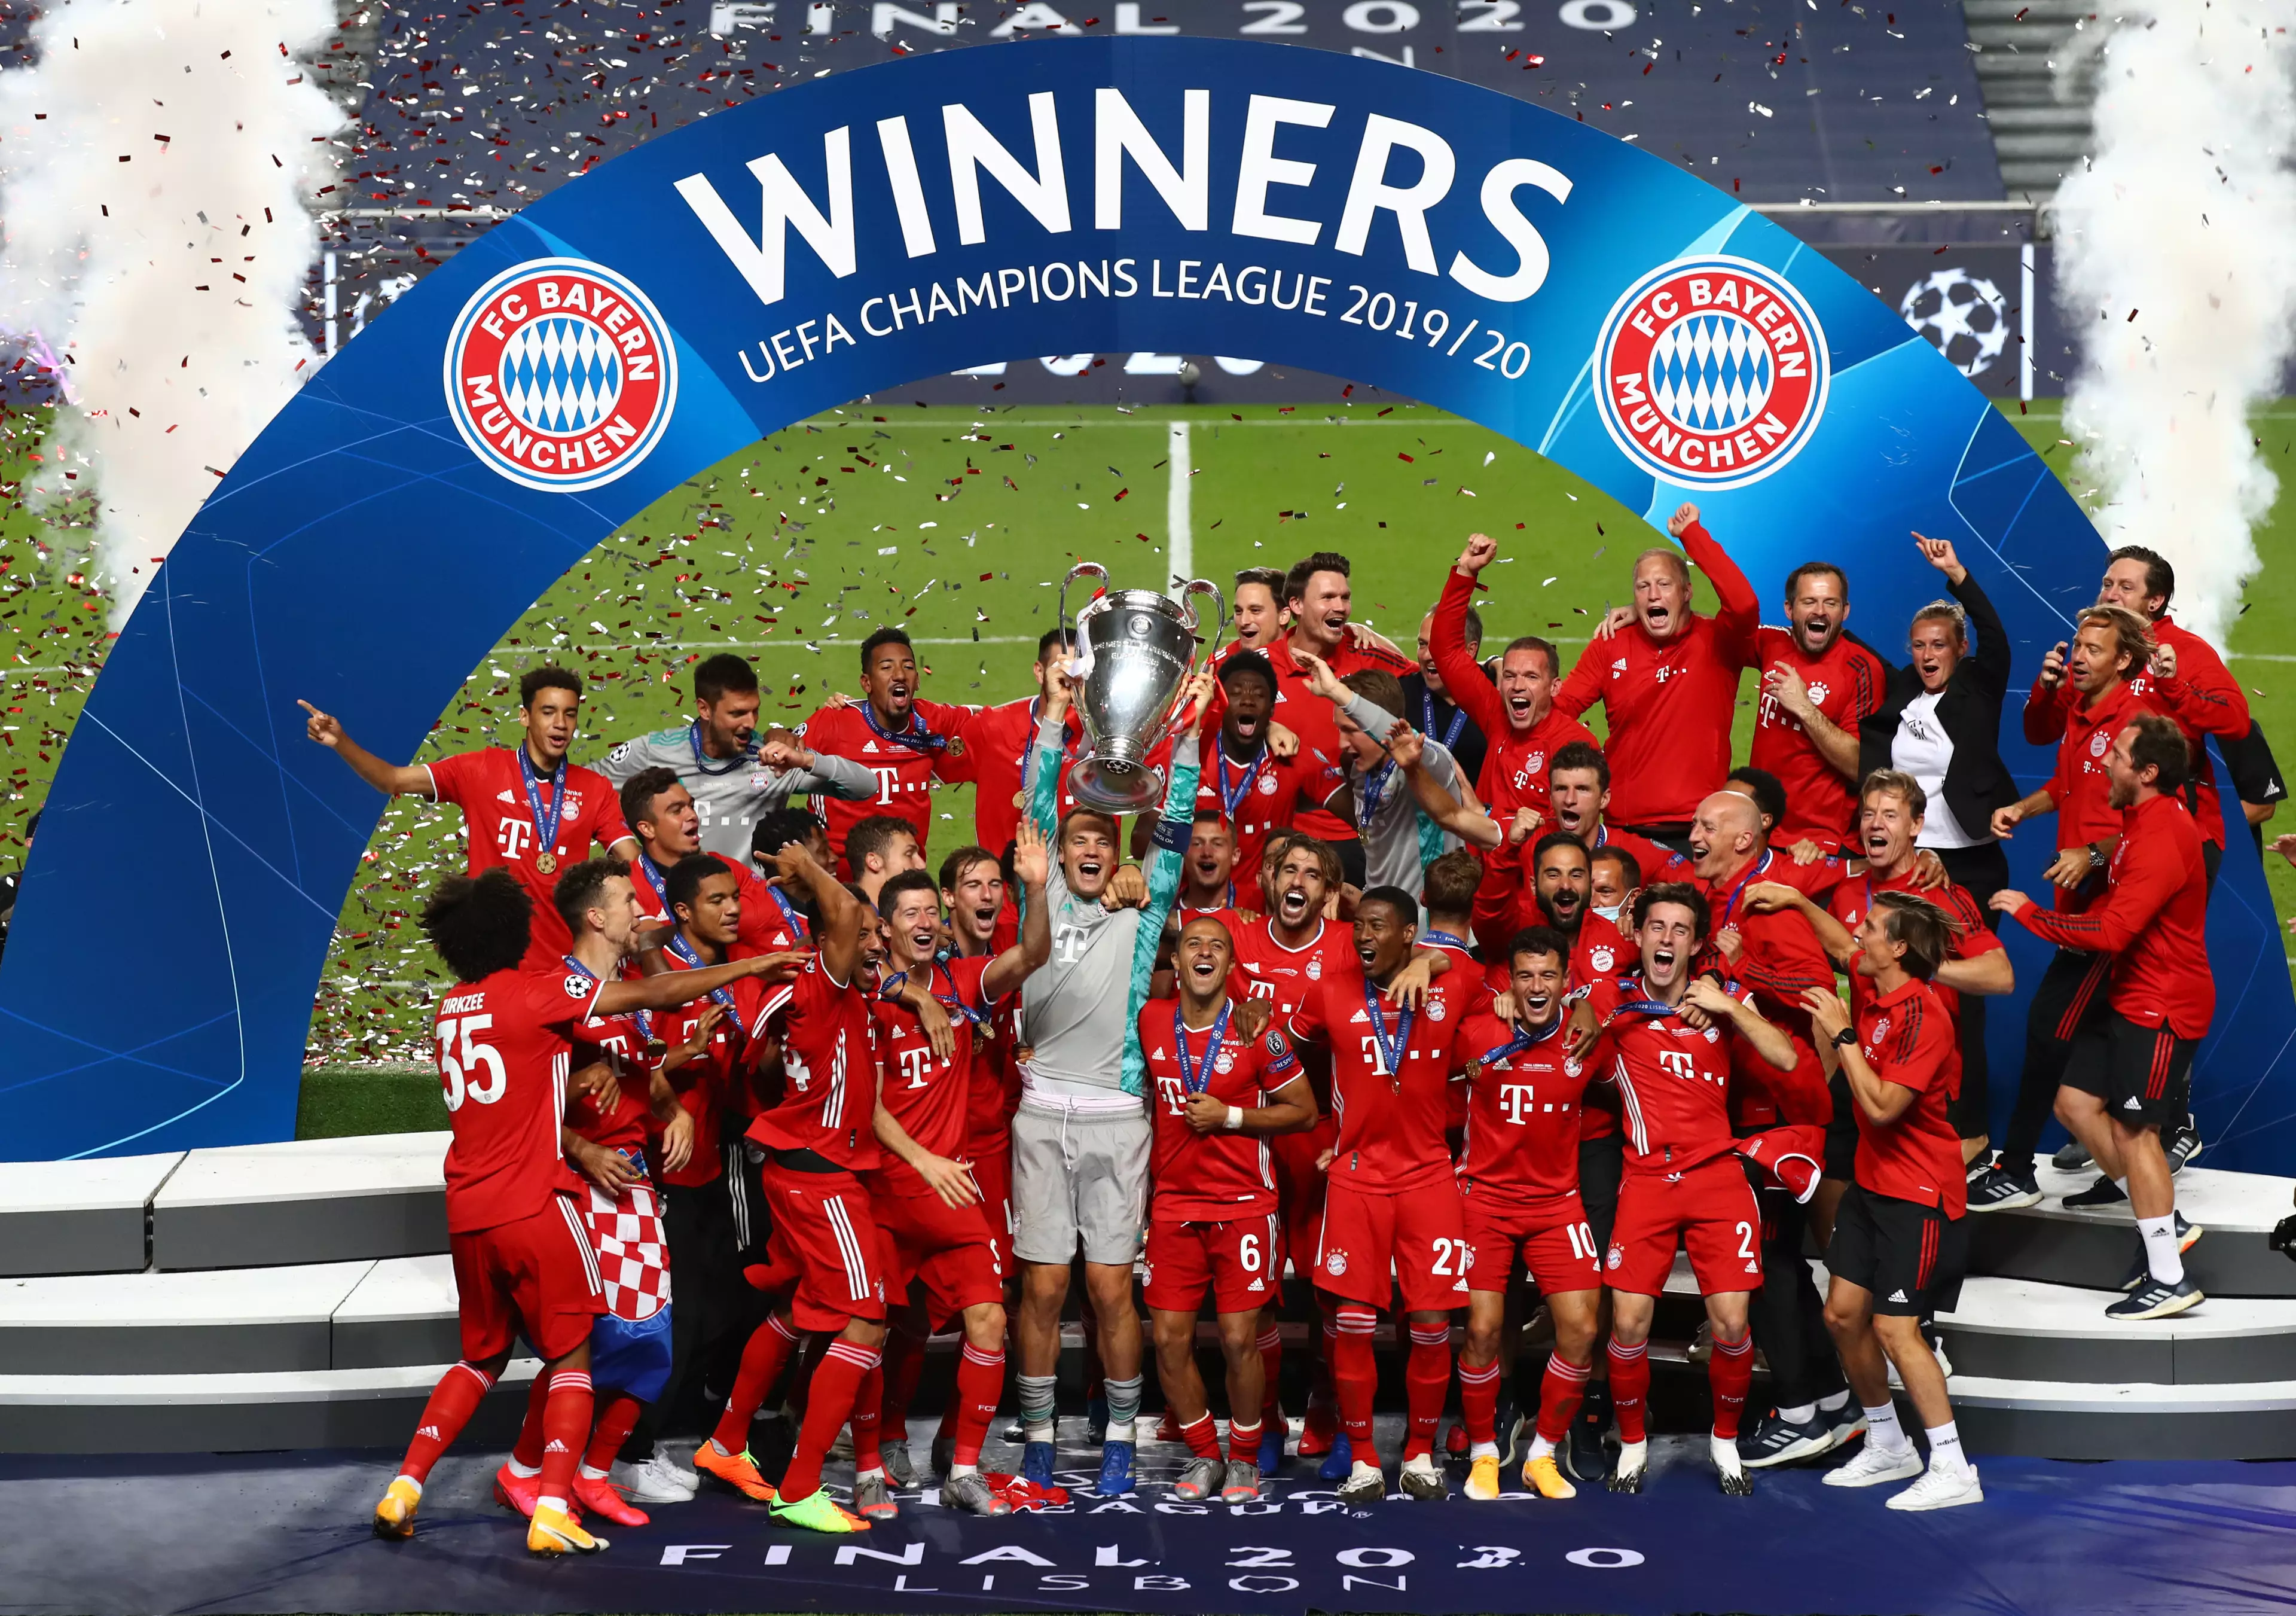 It's no wonder Bayern feature so heavily on the list after their treble season. Image: PA Images